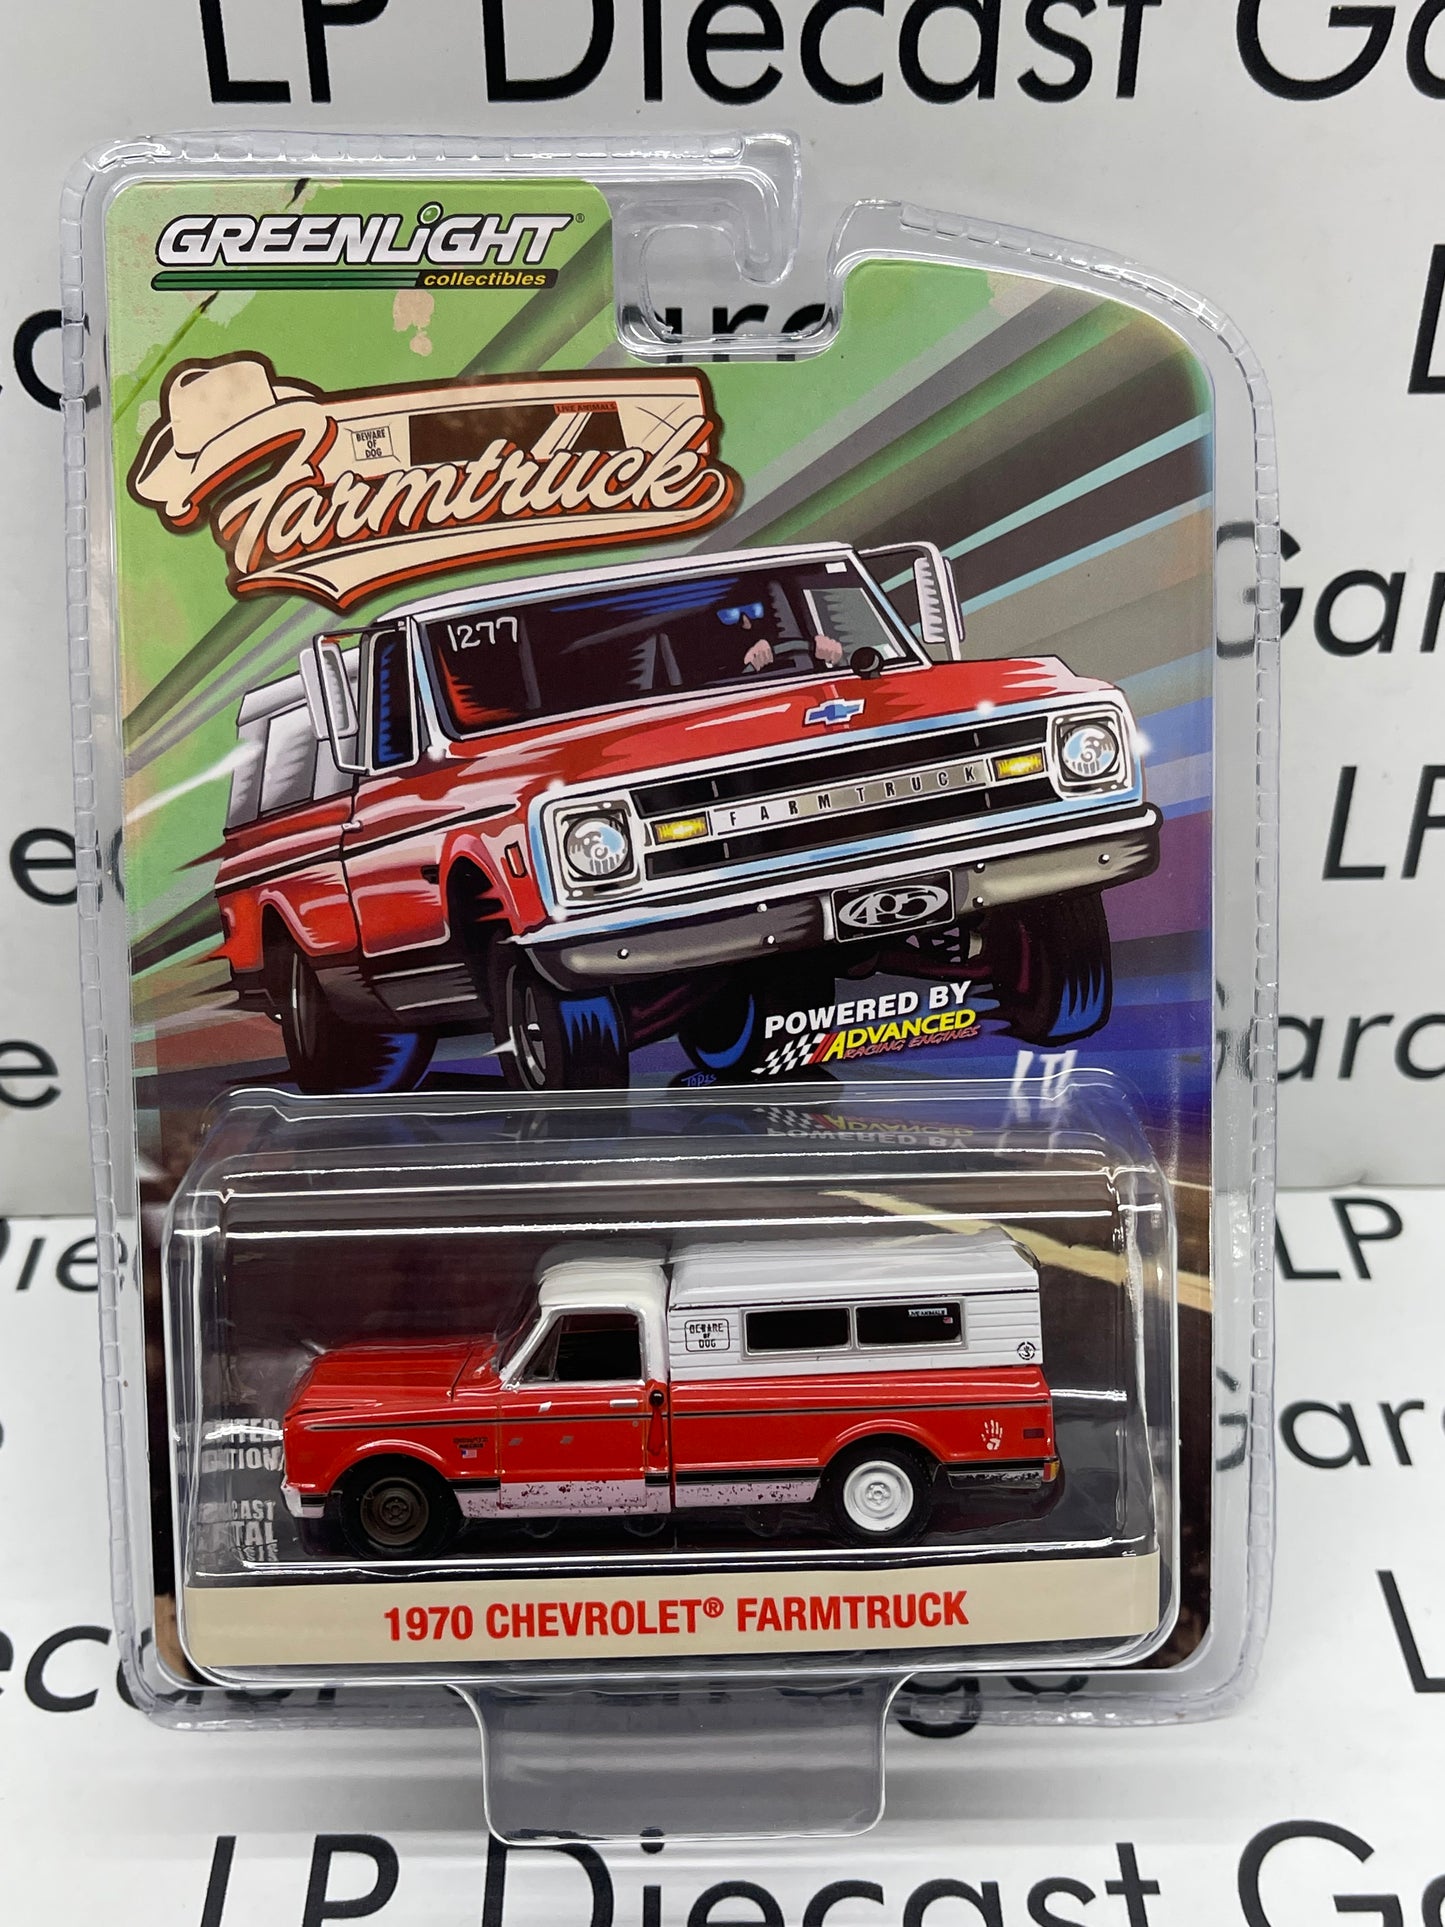 GREENLIGHT 1970 Chevrolet C-10 Farmtruck Drag Racing Street Outlaws 405 Limited Edition Exclusive 1:64 Diecast